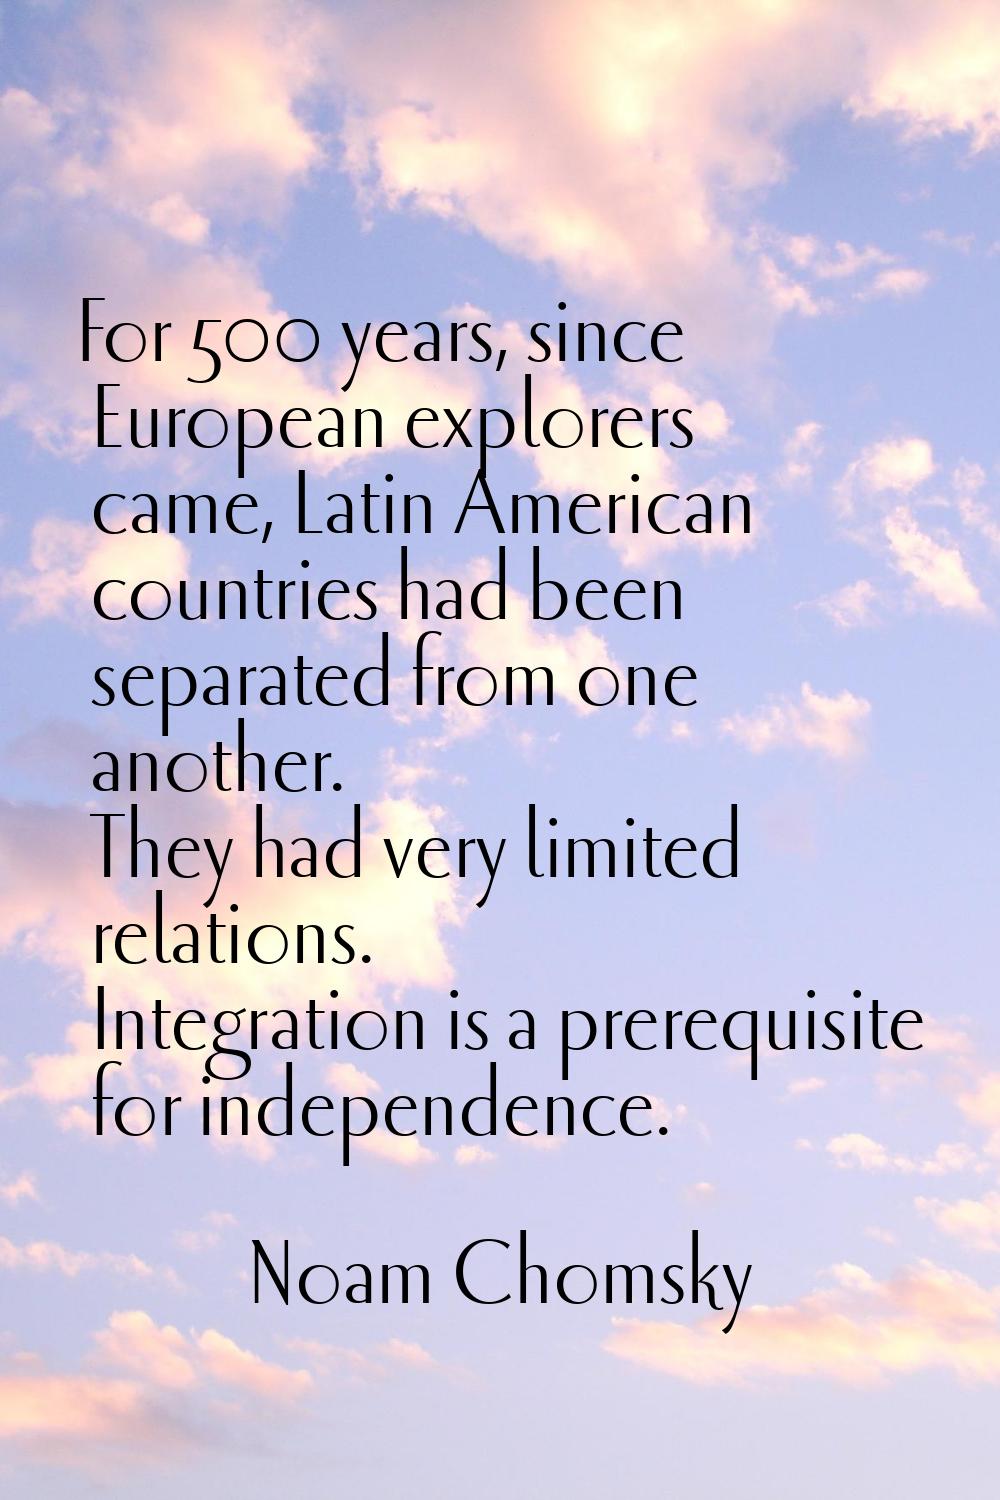 For 500 years, since European explorers came, Latin American countries had been separated from one 